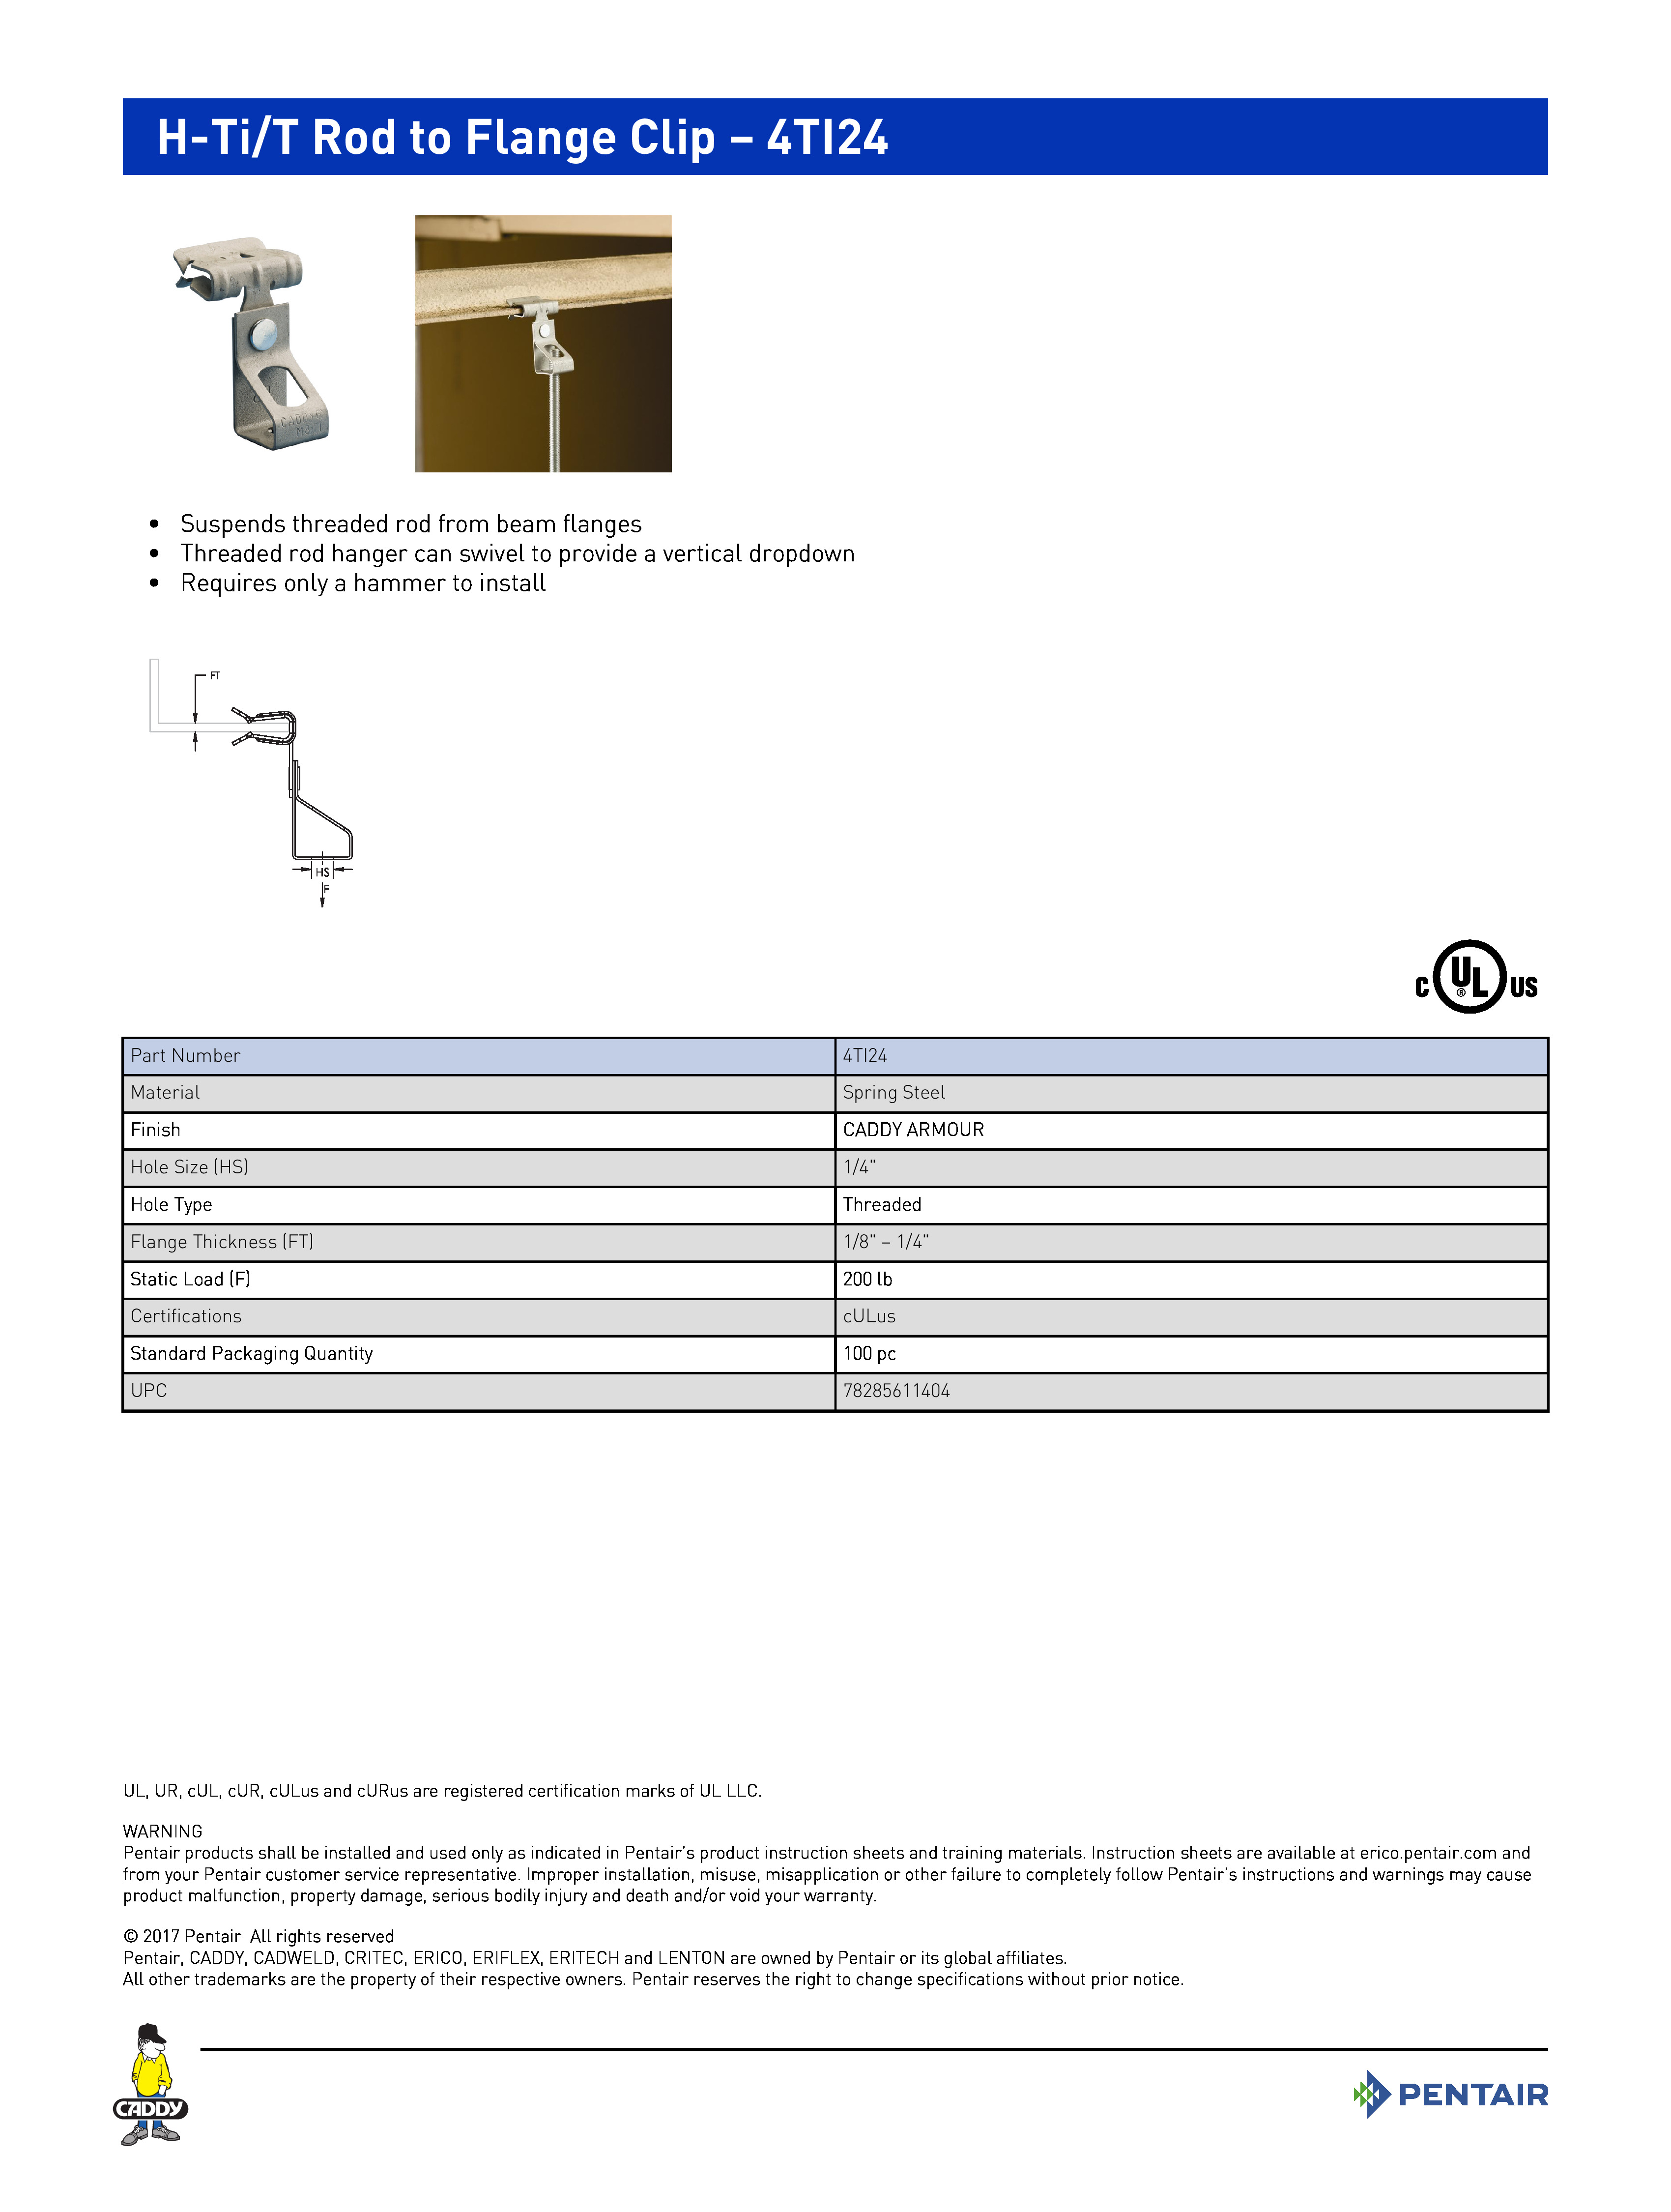 H-Ti/T Rod to Flange Clip – 4TI24	
 	
•	Suspends threaded rod from beam flanges	
•	Threaded rod hanger can swivel to provide a vertical dropdown	
•	Requires only a hammer to install	
Part Number4TI24MaterialSpring SteelFinishCADDY ARMOURHole Size (HS)1/4"Hole TypeThreadedFlange Thickness (FT)1/8" – 1/4"Static Load (F)200 lbCertificationscULusStandard Packaging Quantity100 pcUPC78285611404
UL, UR, cUL, cUR, cULus and cURus are registered certification marks of UL LLC. WARNINGPentair products shall be installed and used only as indicated in Pentair’s product instruction sheets and training materials. Instruction sheets are available at erico.pentair.com andfrom your Pentair customer service representative. Improper installation, misuse, misapplication or other failure to completely follow Pentair’s instructions and warnings may causeproduct malfunction, property damage, serious bodily injury and death and/or void your warranty. 